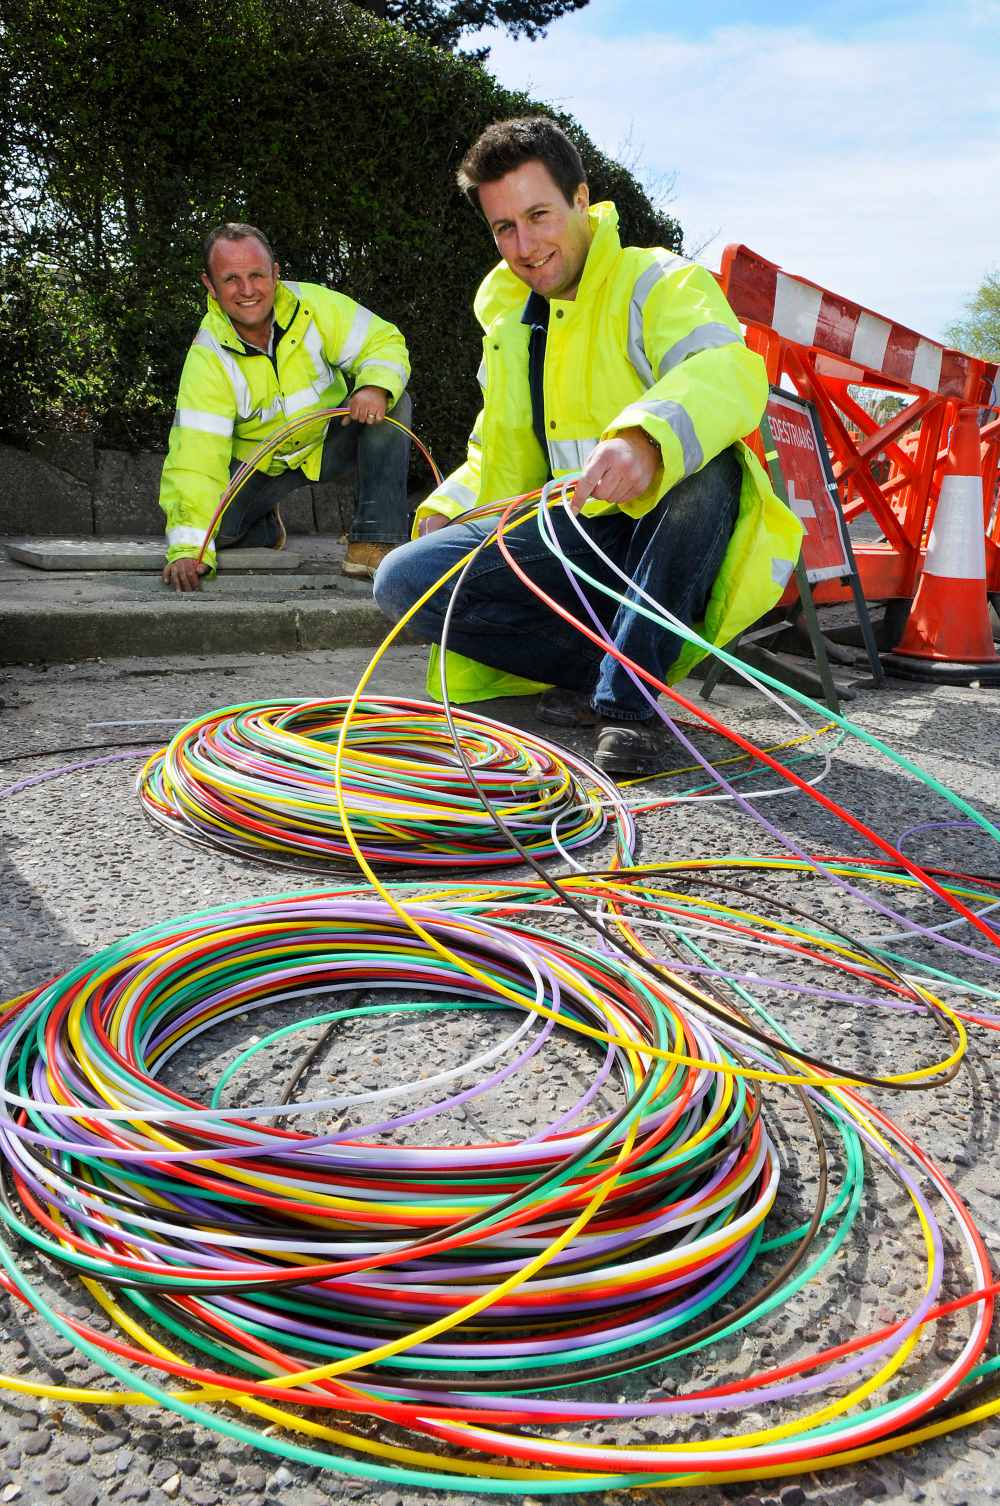 Workers lay gigabit capable fibre optic cable